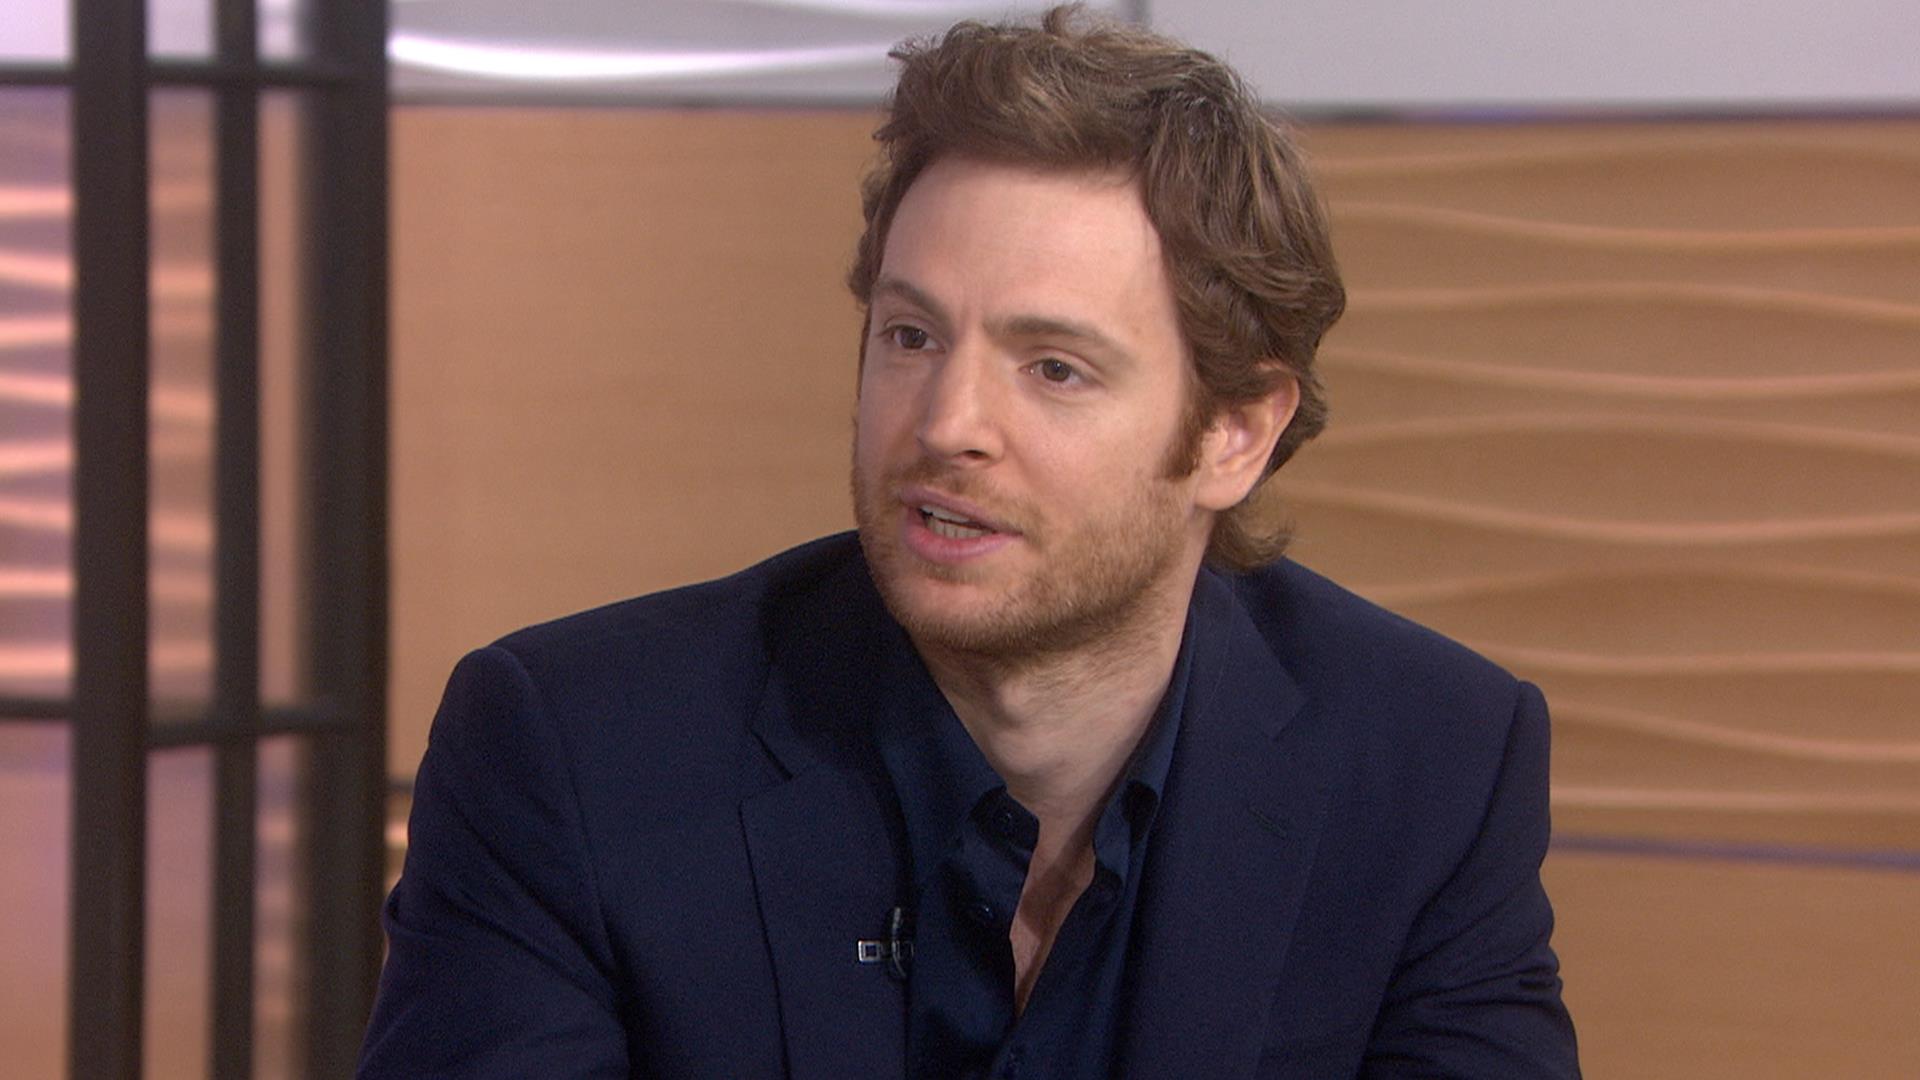 Known for such shows as “Shameless” and “The Newsroom,” actor Nick Gehlfuss has joined th...